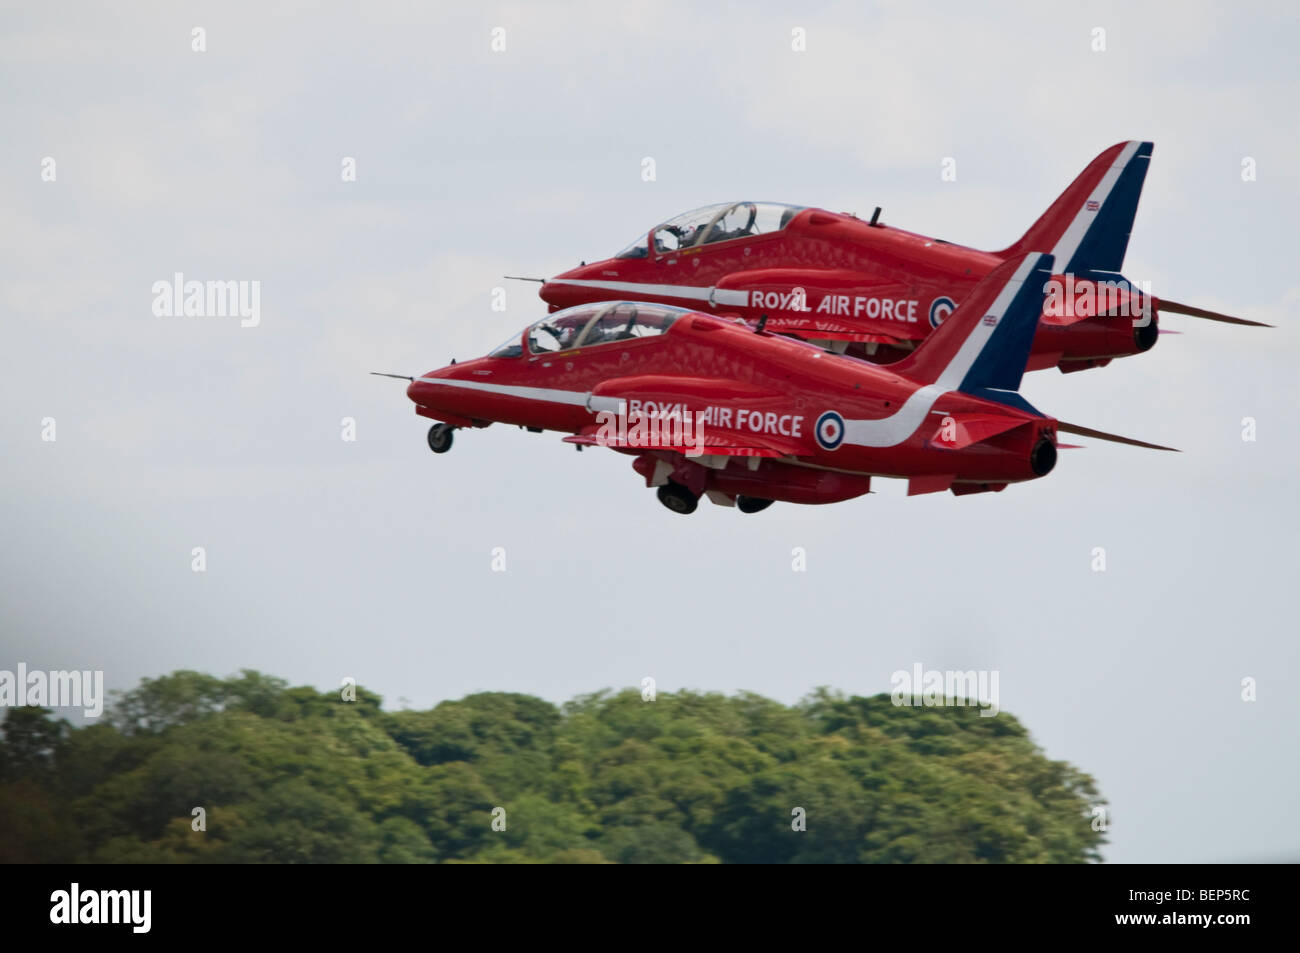 Red Arrows formation team take off in pairs at RAF Waddington Airshow. The Red Arrows currently fly the BAE Hawk aircraft. Stock Photo